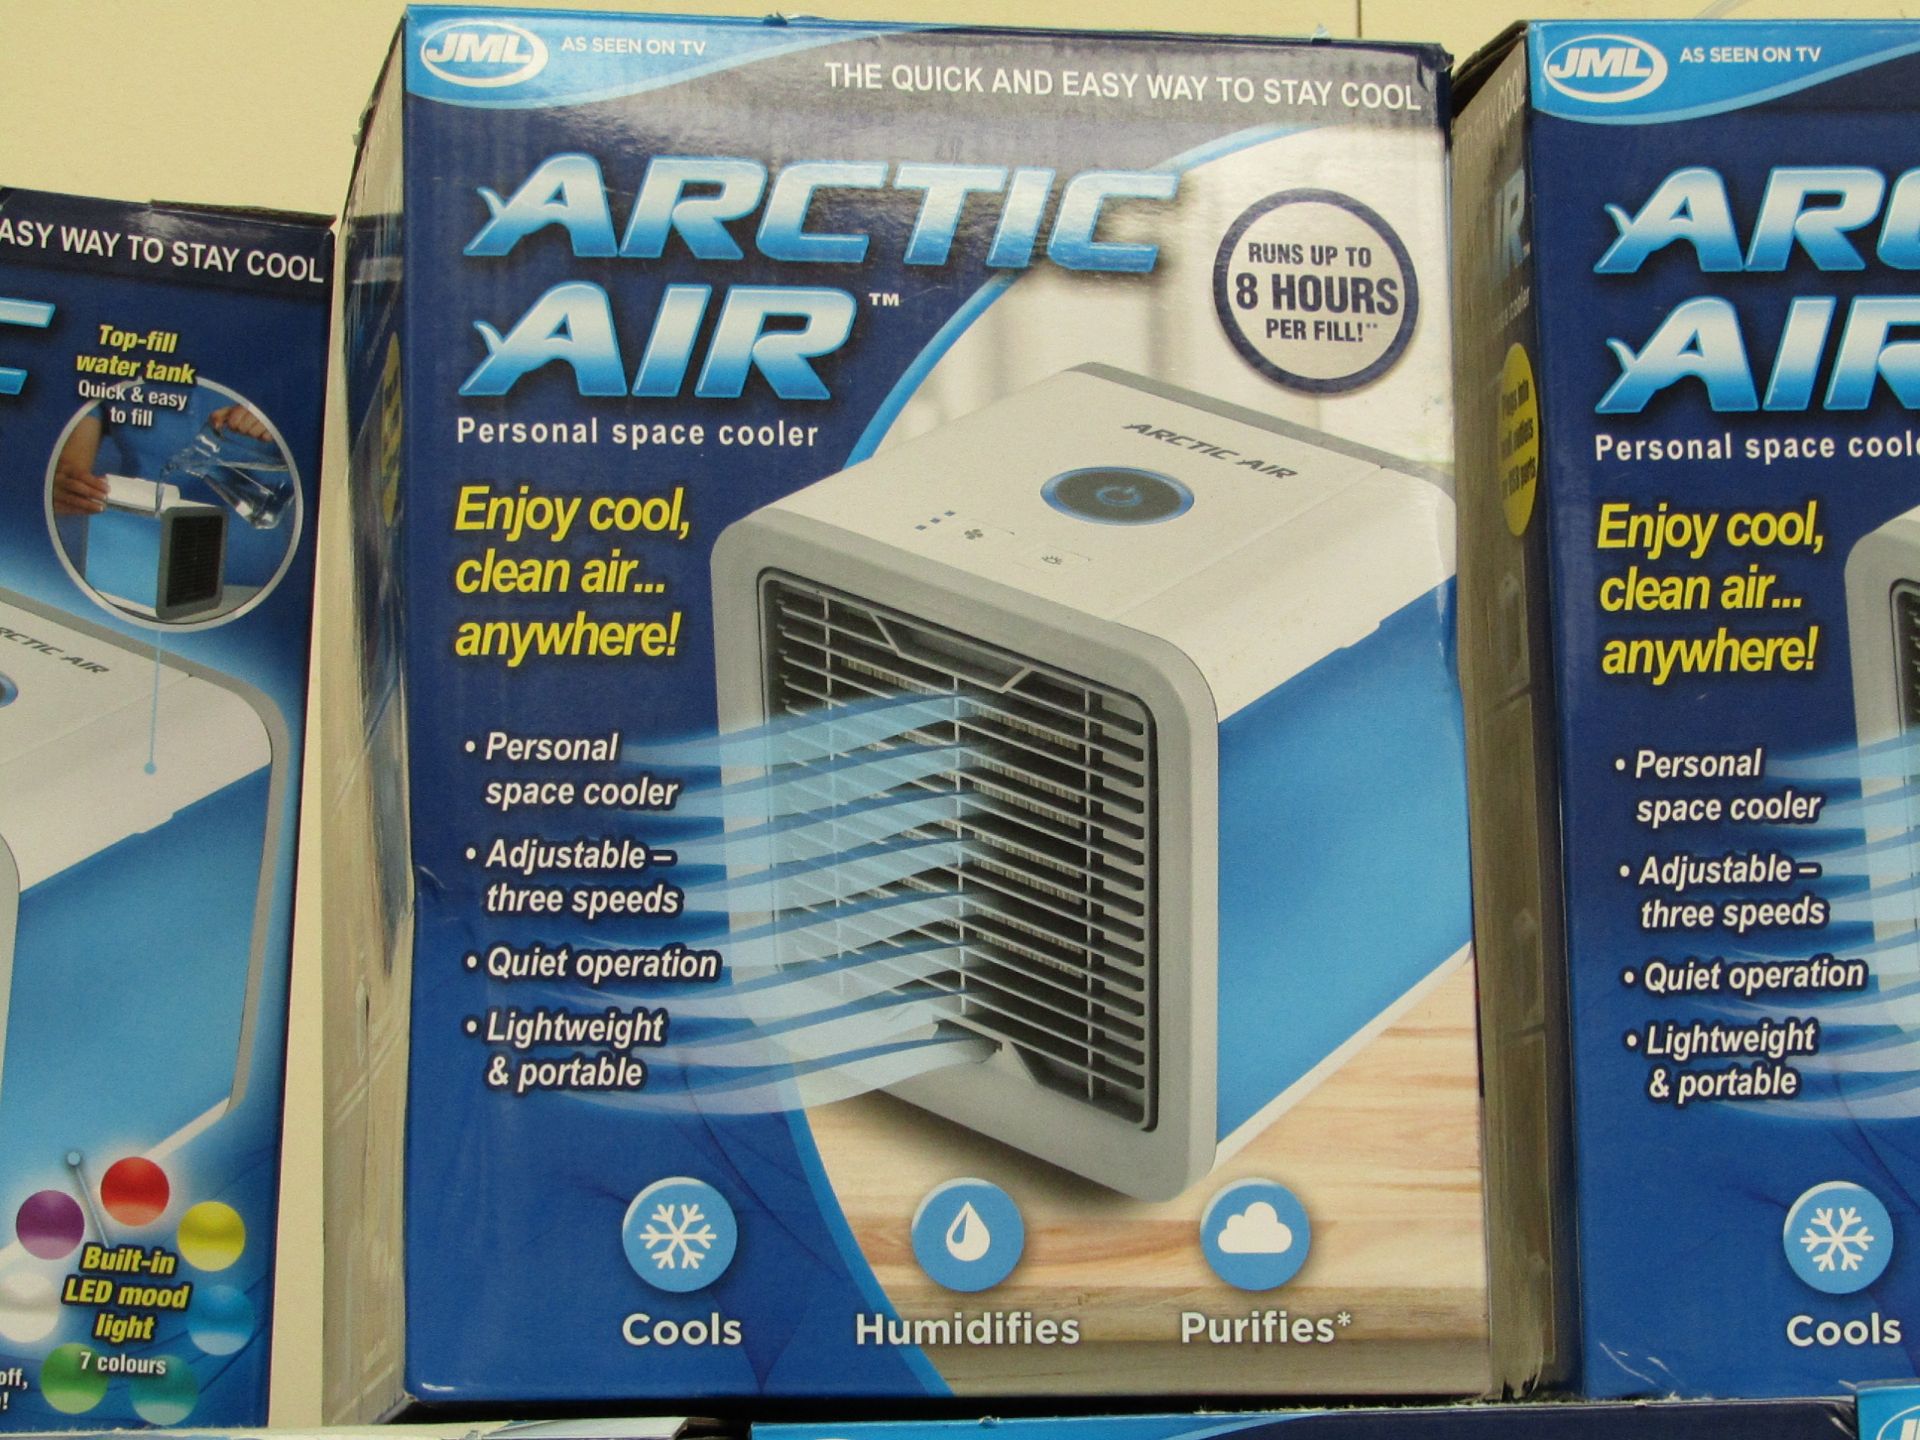 JML Arctic air personal space cooler with adjustable speed and quiet operation. Unchecked and